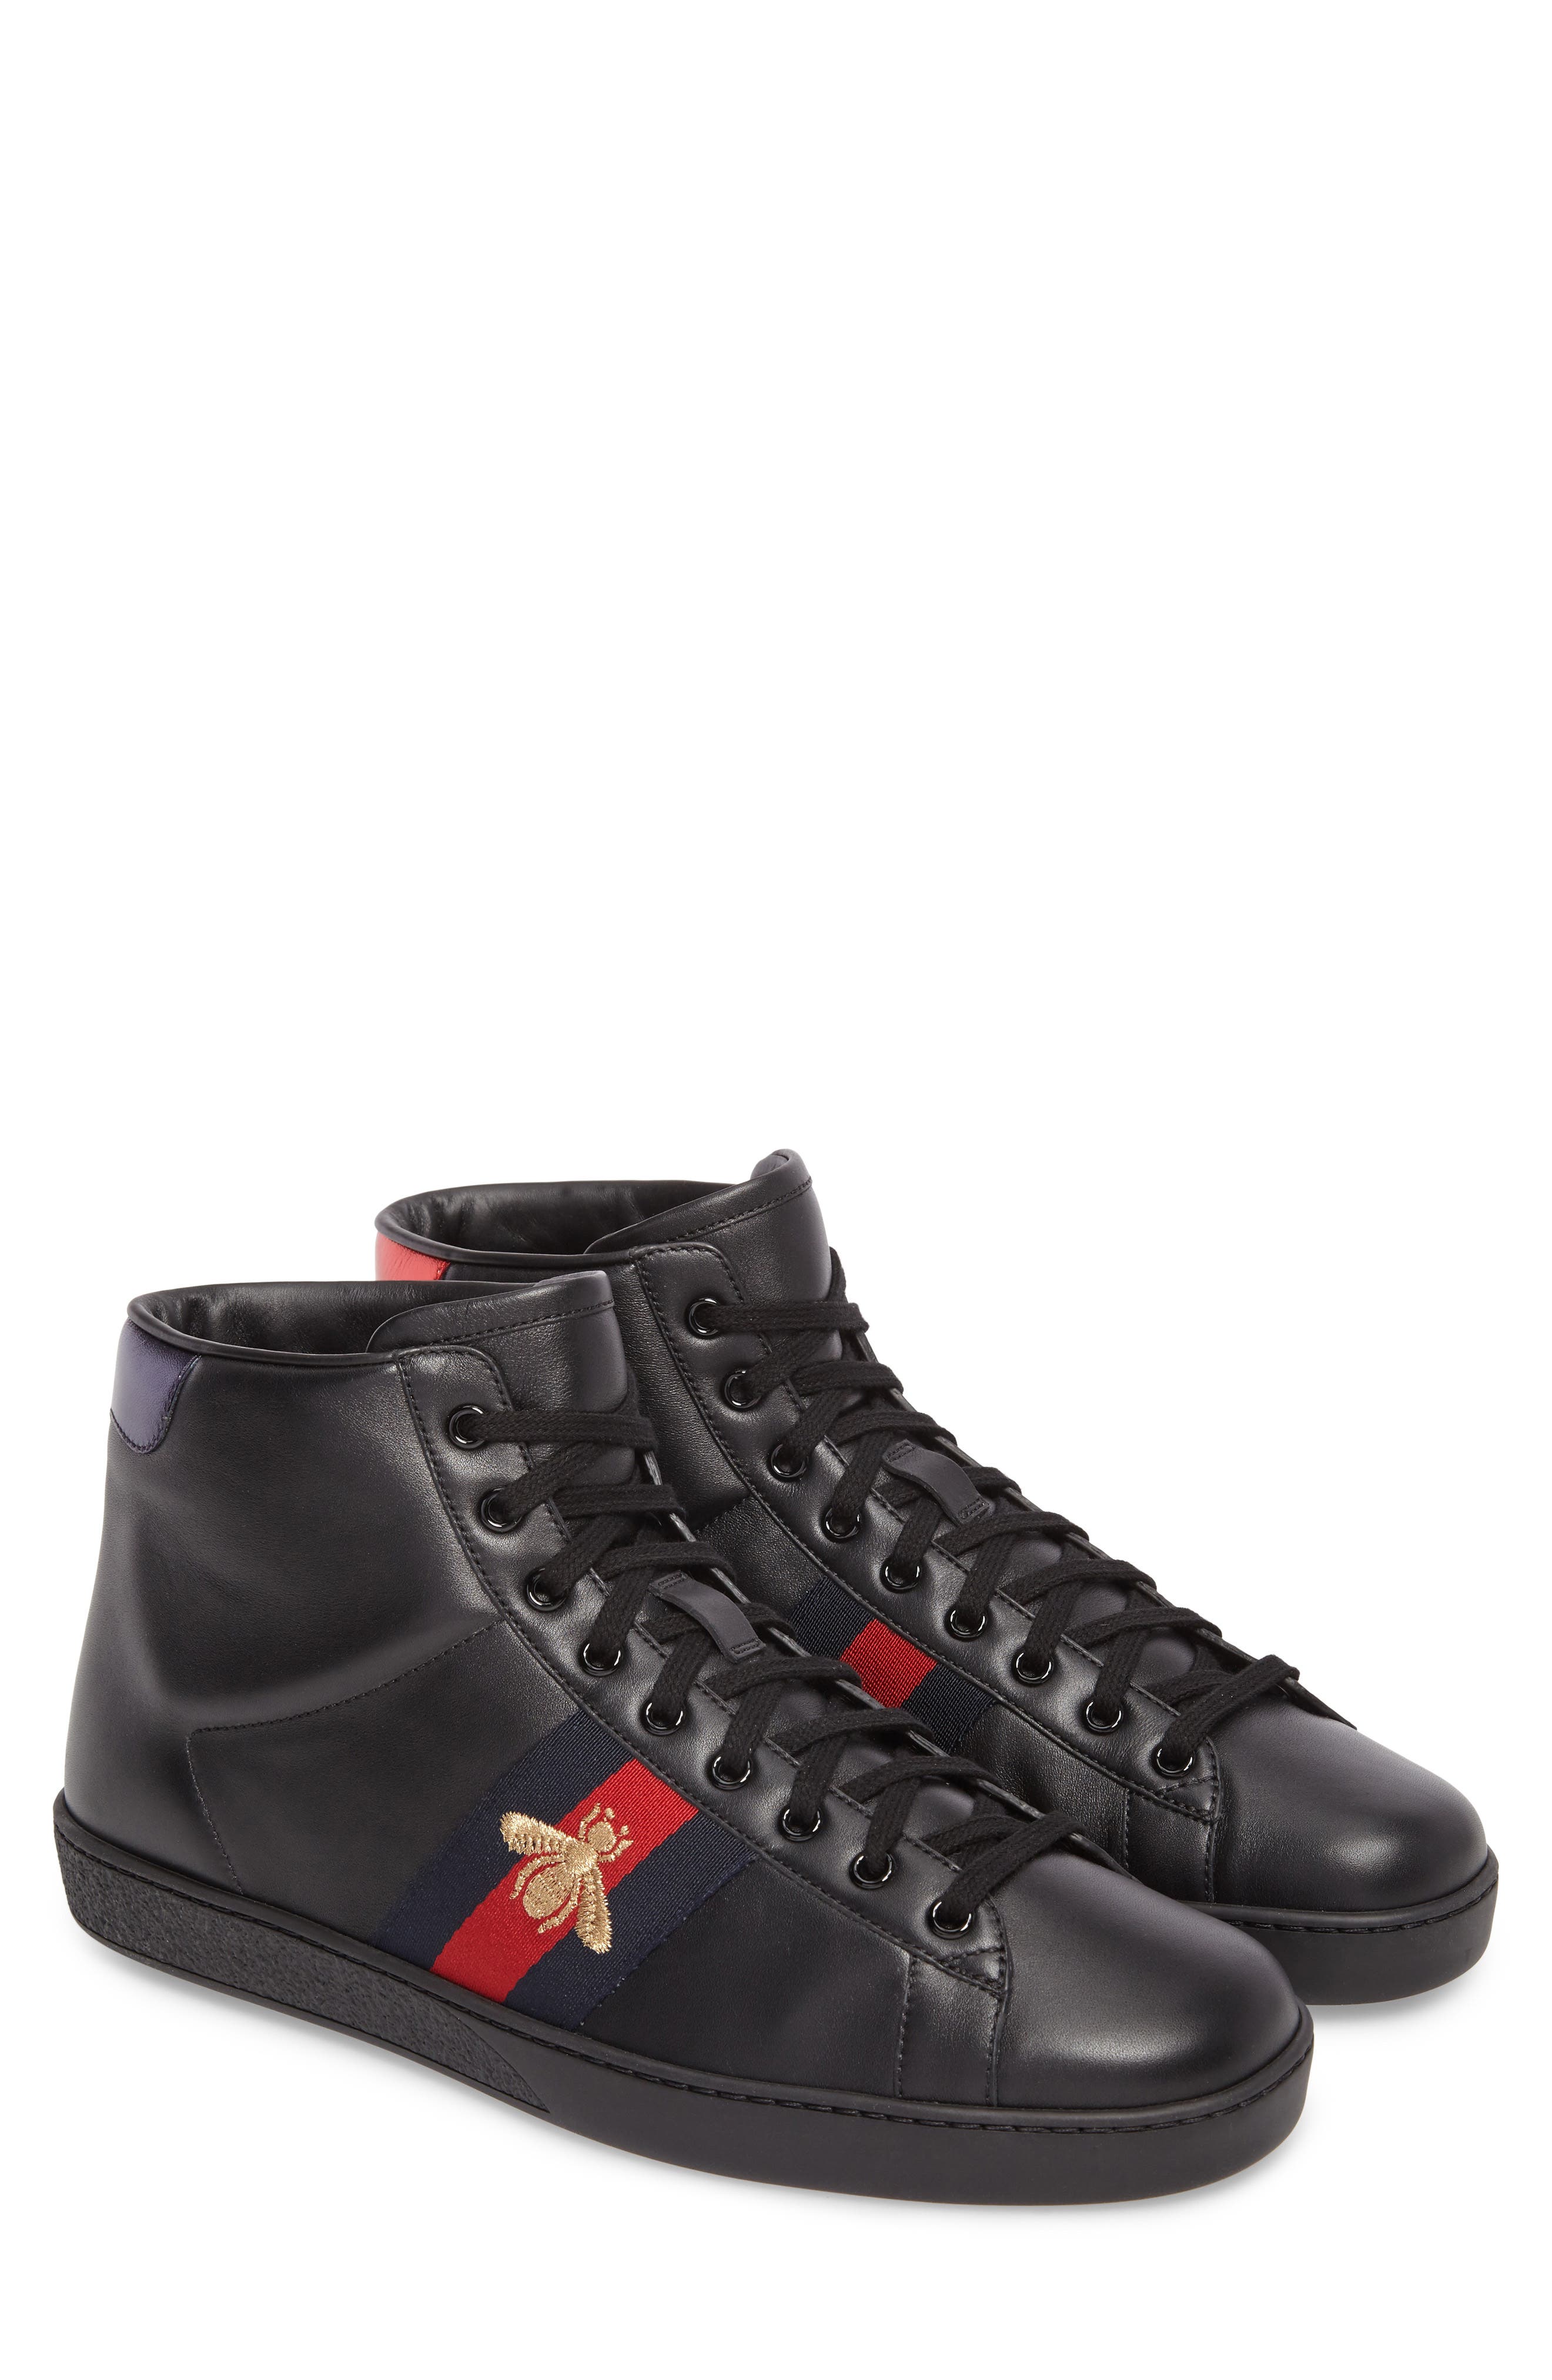 GUCCI New Ace Bee Embroidered High Top Sneakers, Black | ModeSens